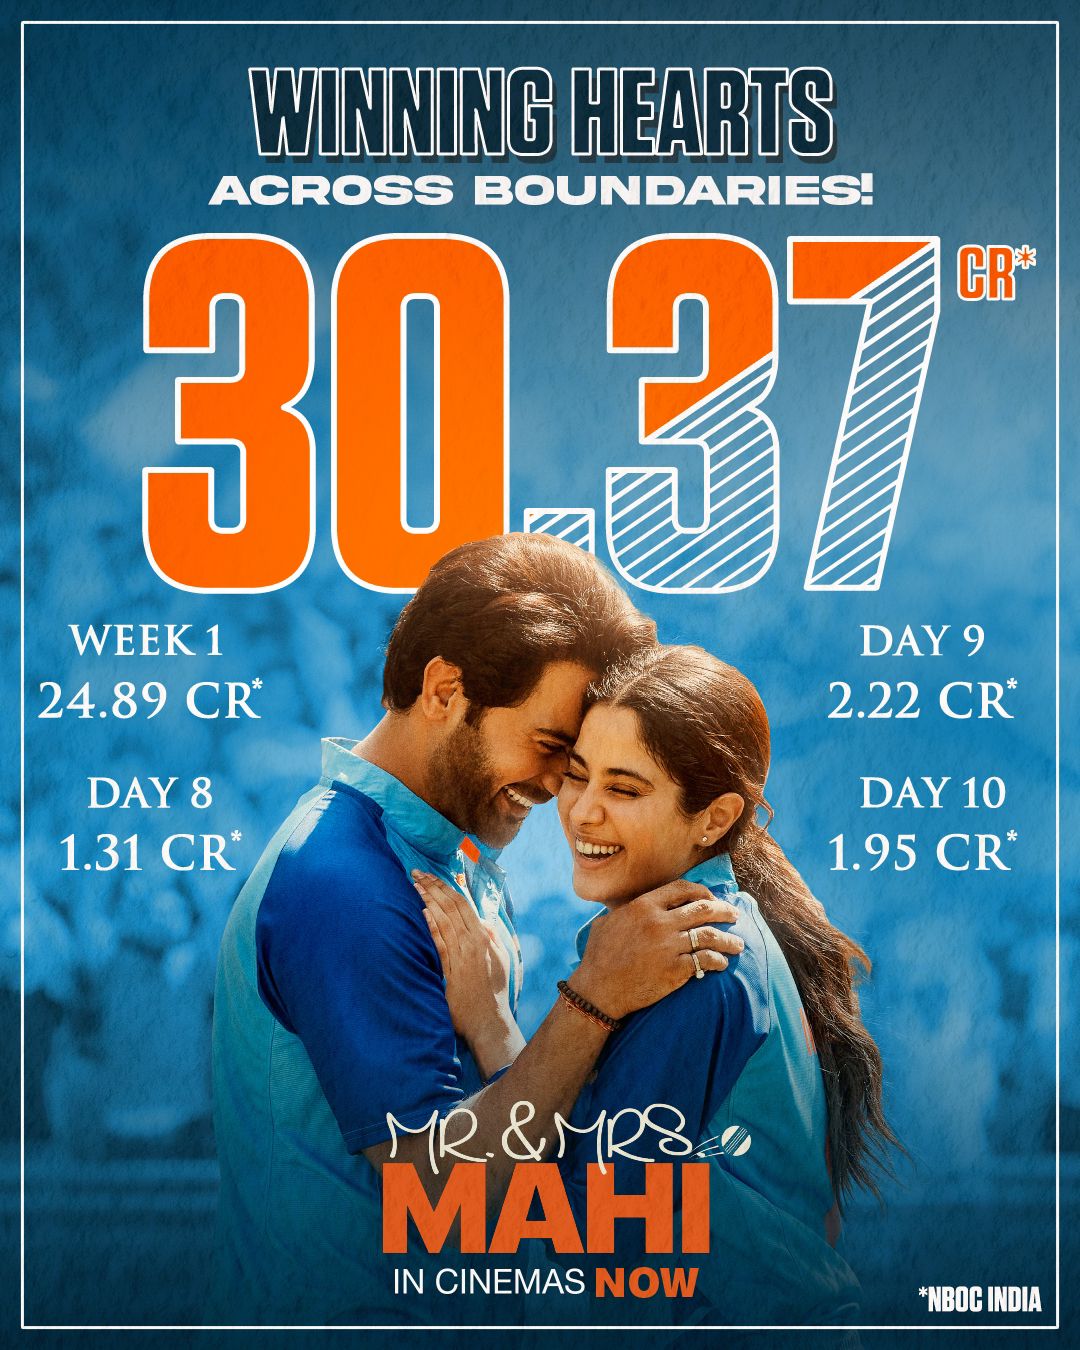 Mr & Mrs Mahi Box Office Day 10 collection